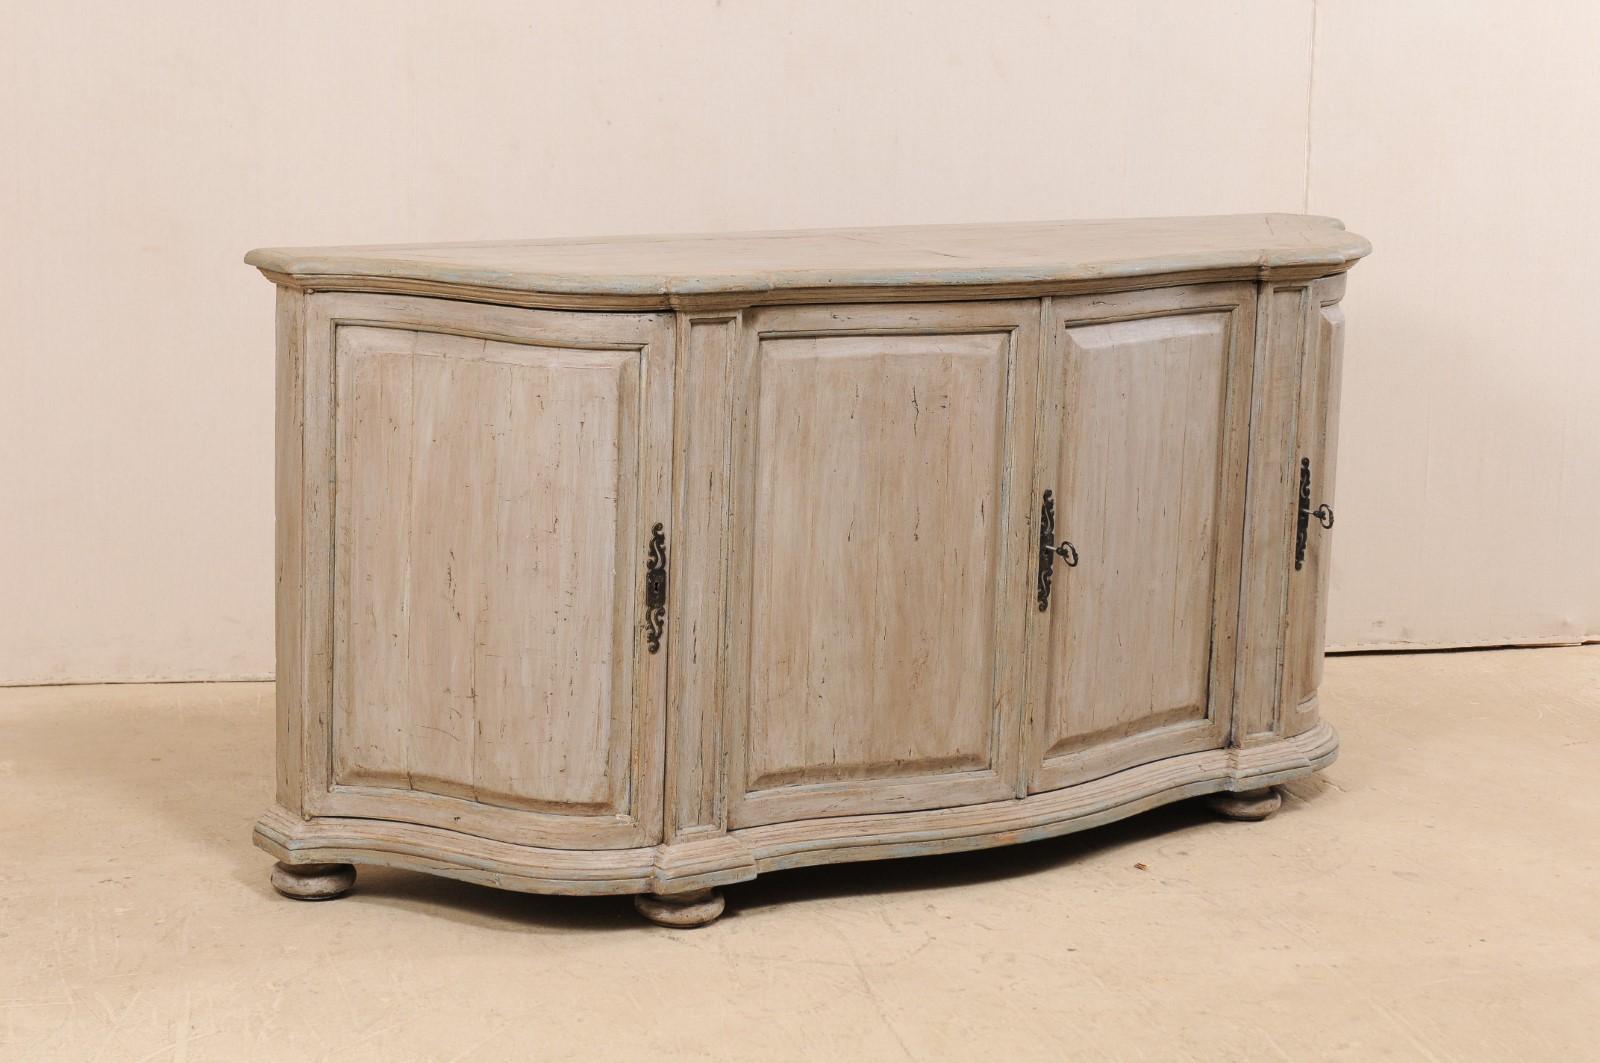 An American made, Italian design inspired, console cabinet. This vintage Italian style buffet cabinet features a fluid demi-style top, whose shape is mimicked in the body beneath, and fitted with four doors. The doors each have raised panels and